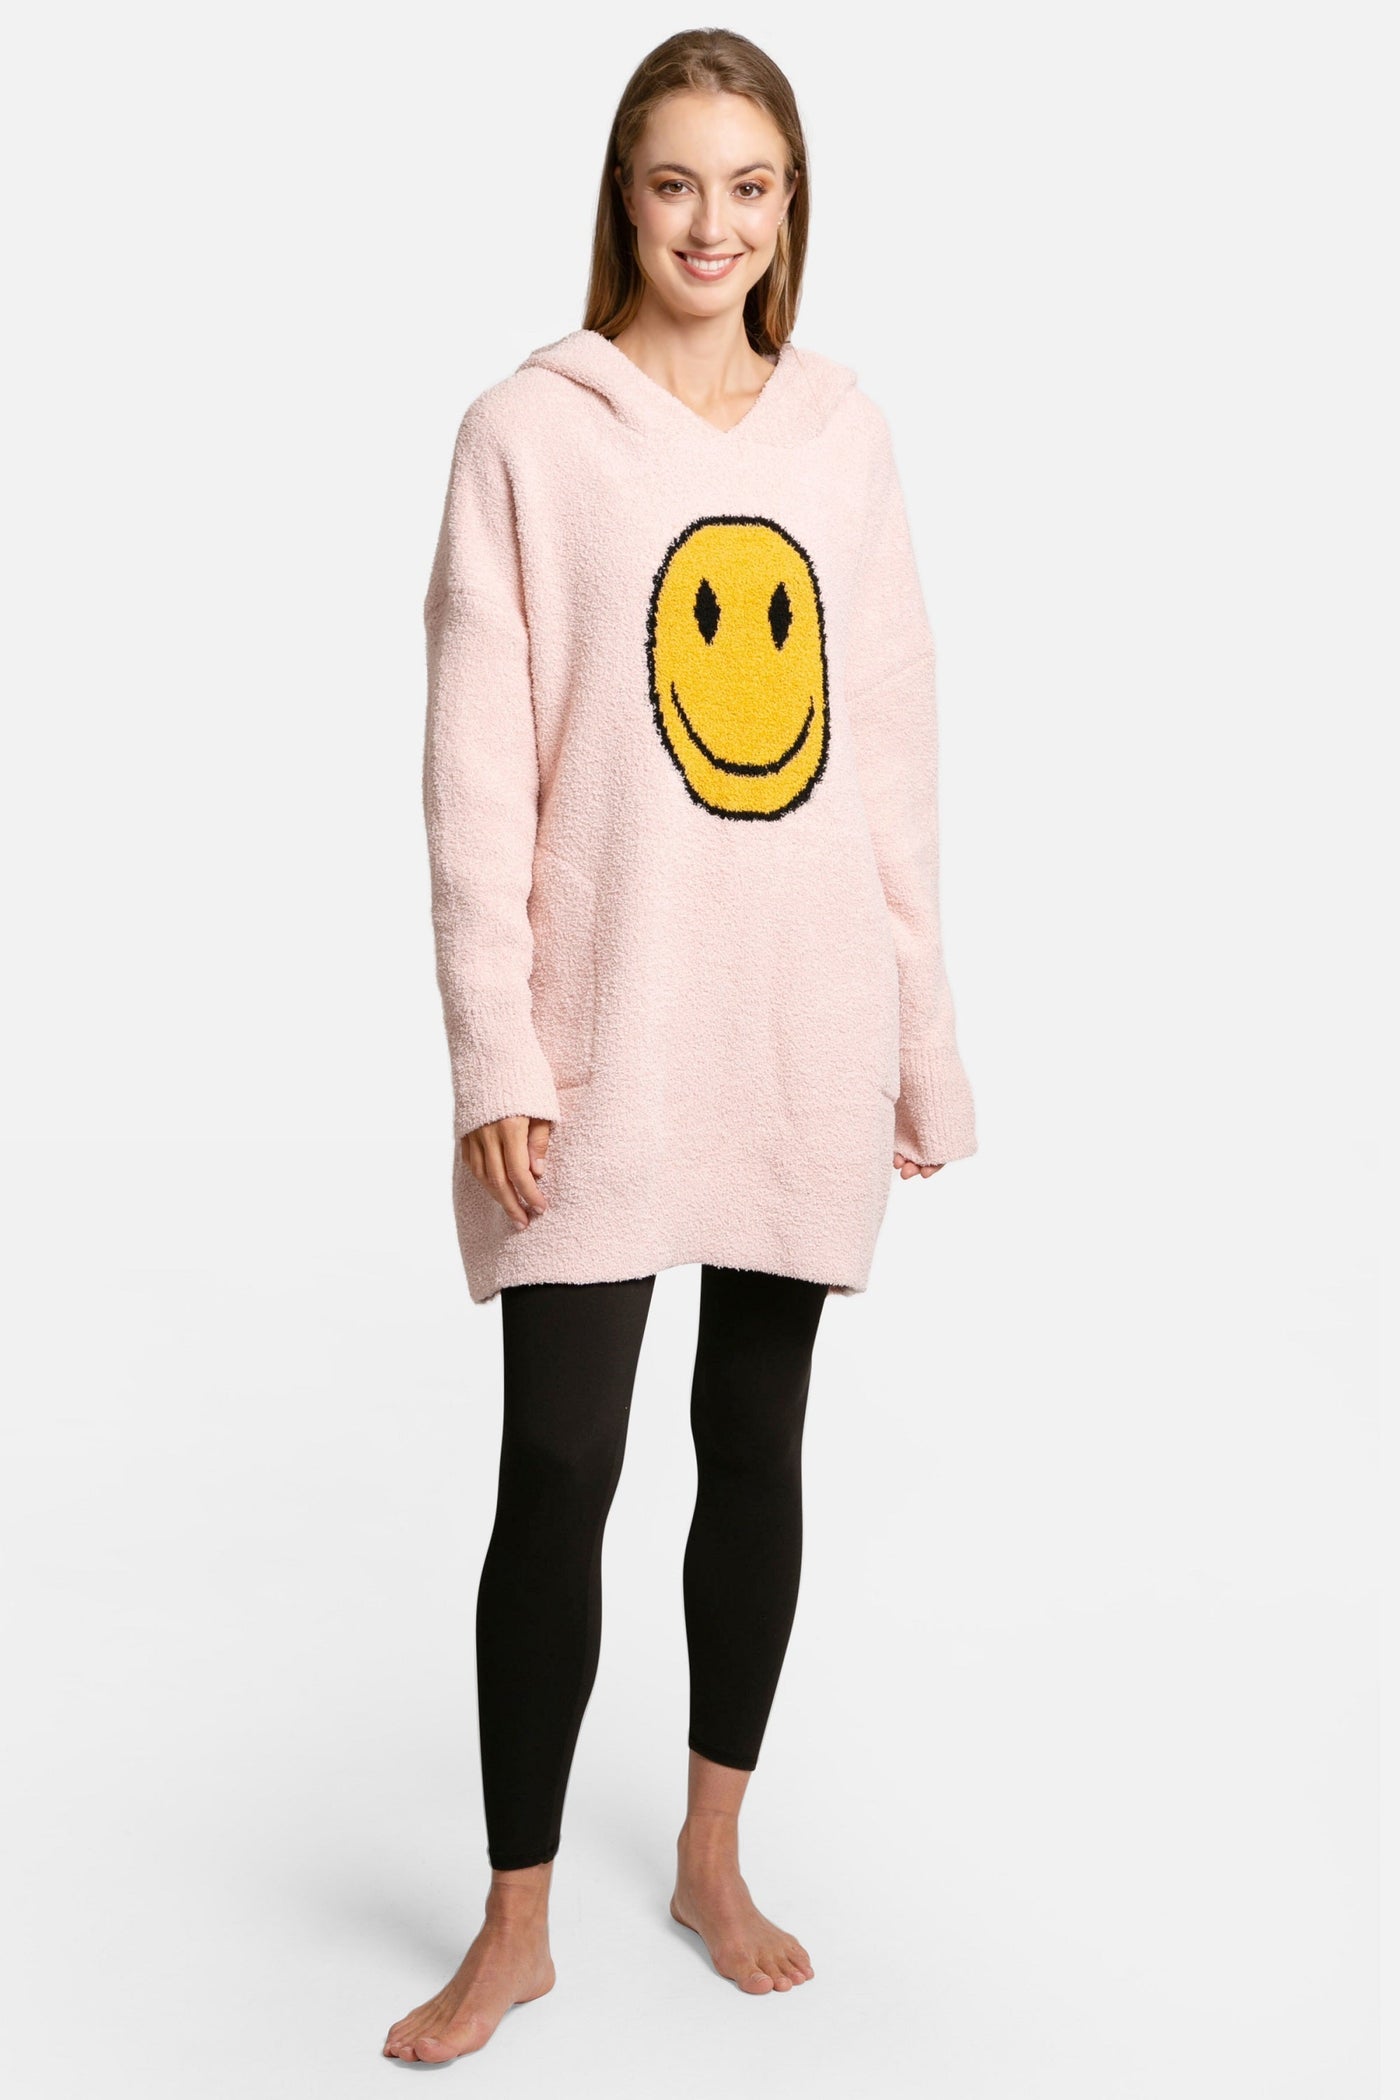 JCL4010 Super Lux Smiley Face Hooded Wearable Blanket